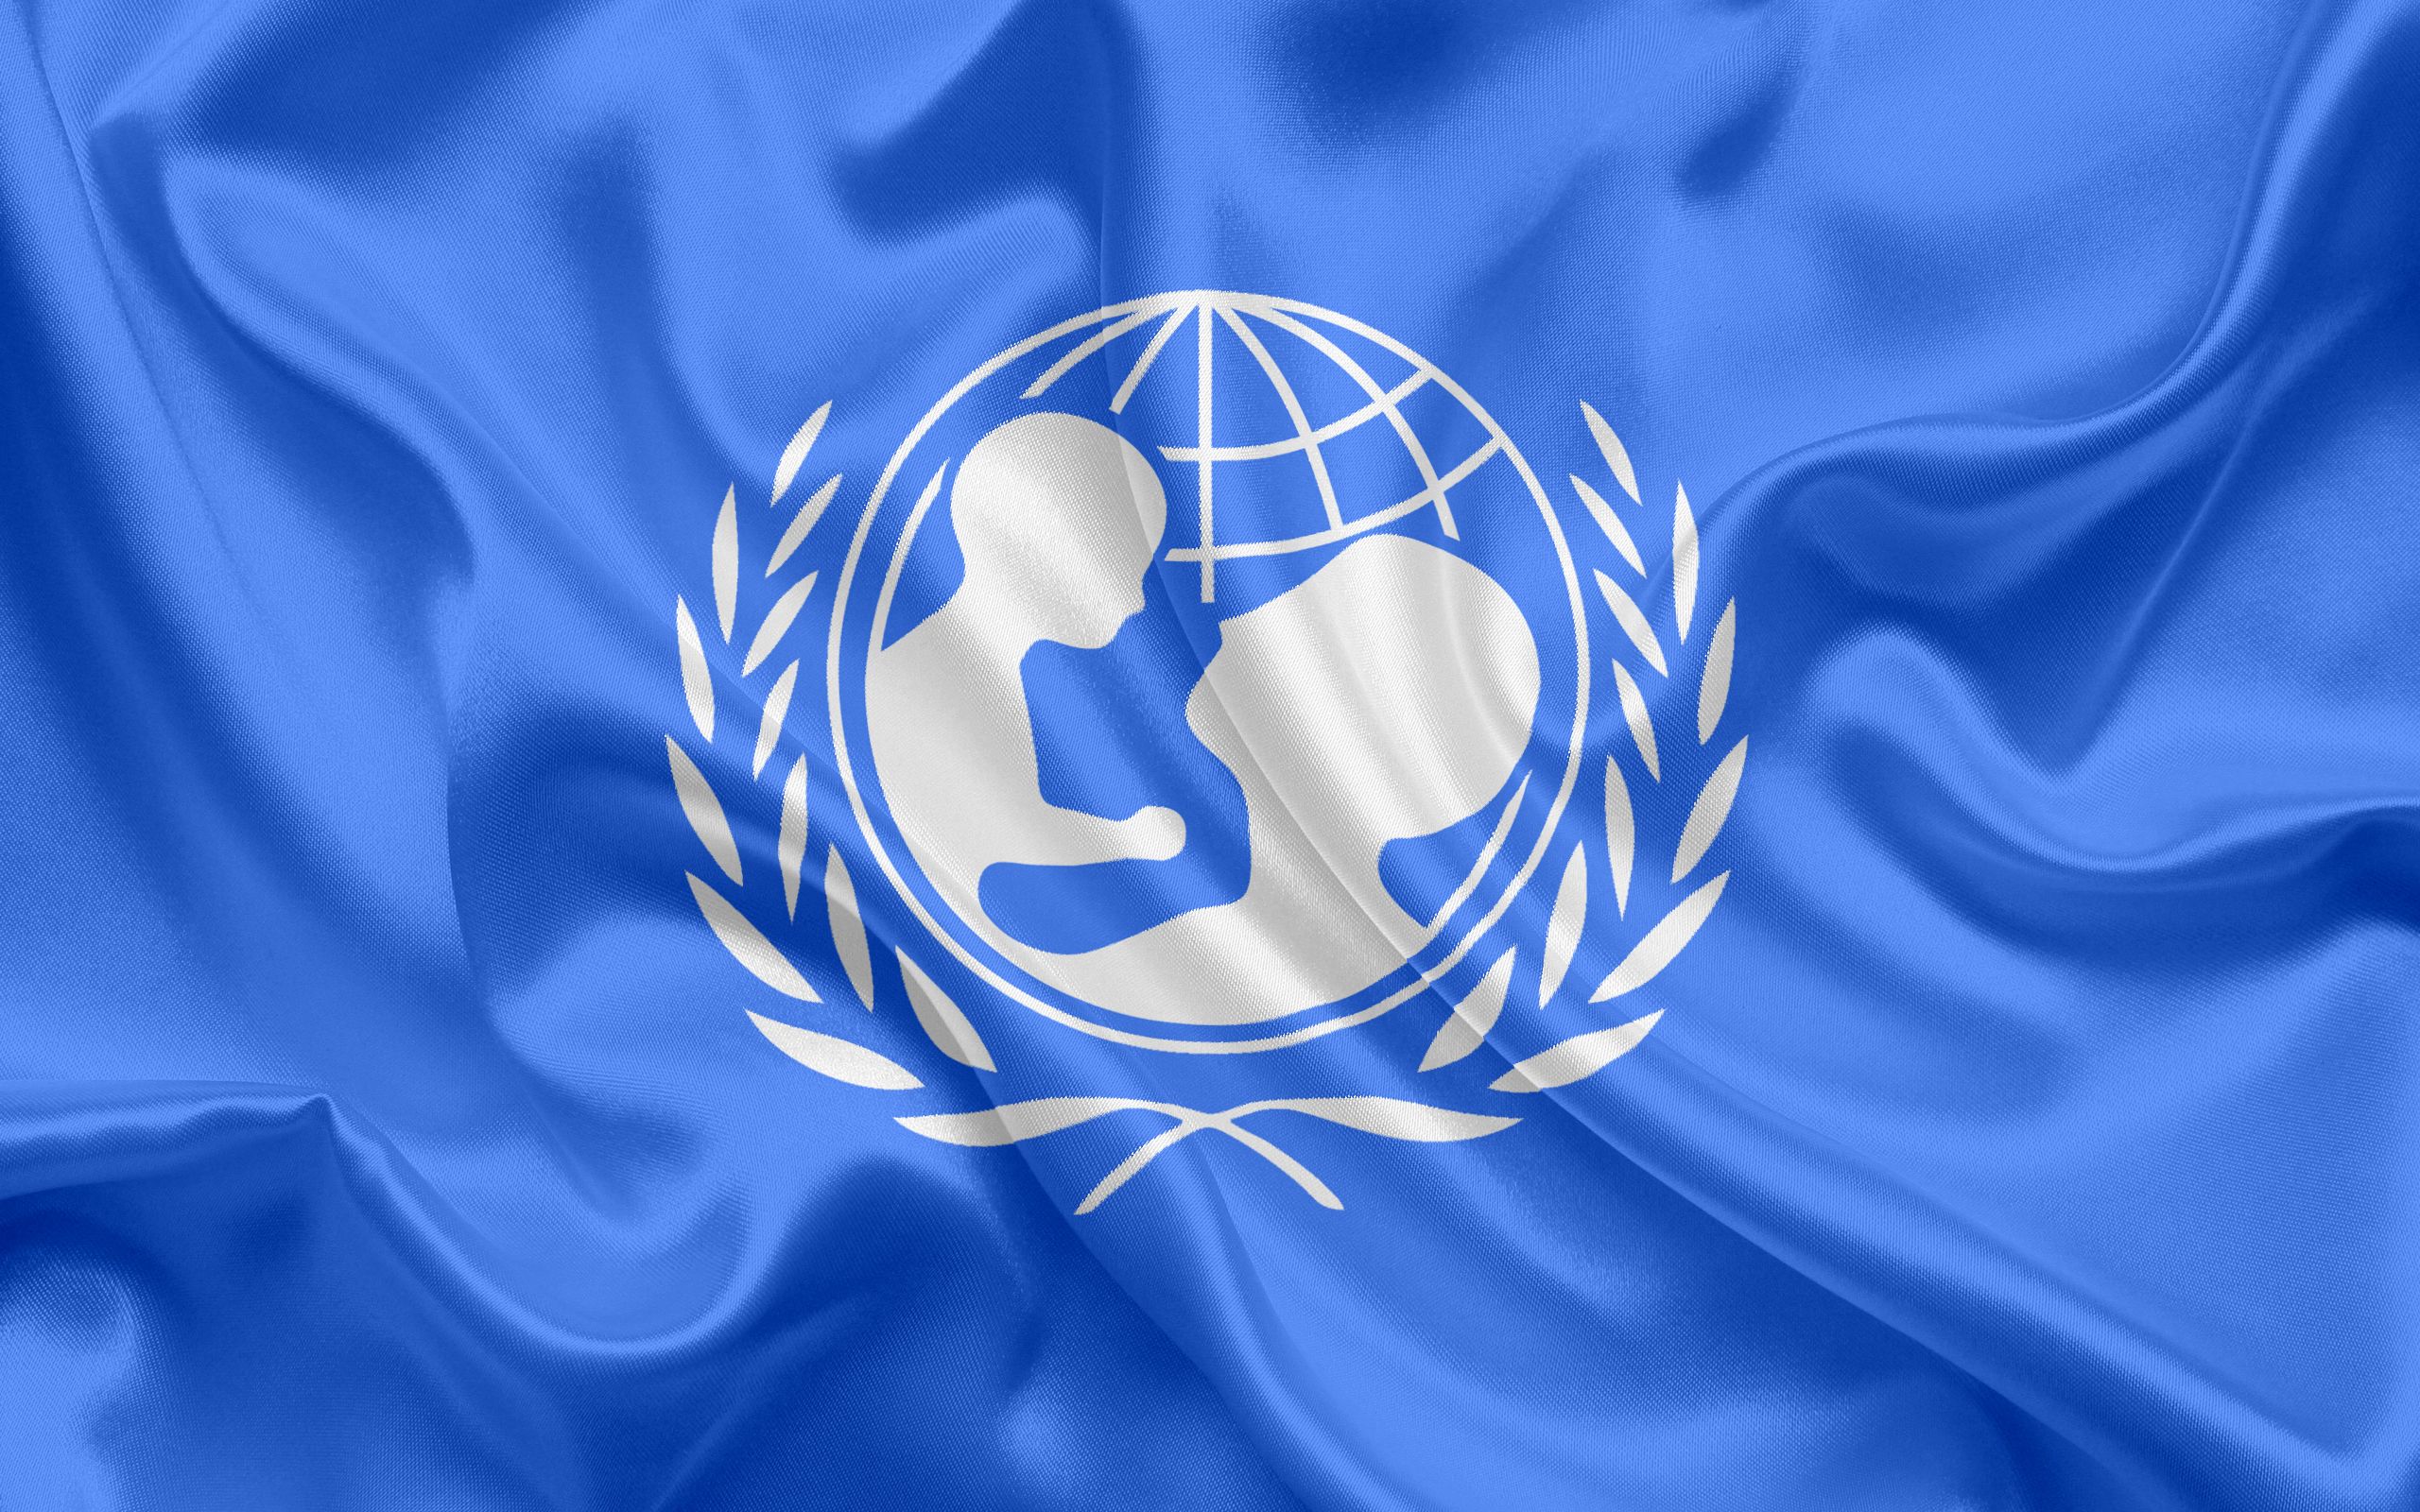 UNICEF lauds PH raising age of sexual consent to 16 | Philippine News Agency